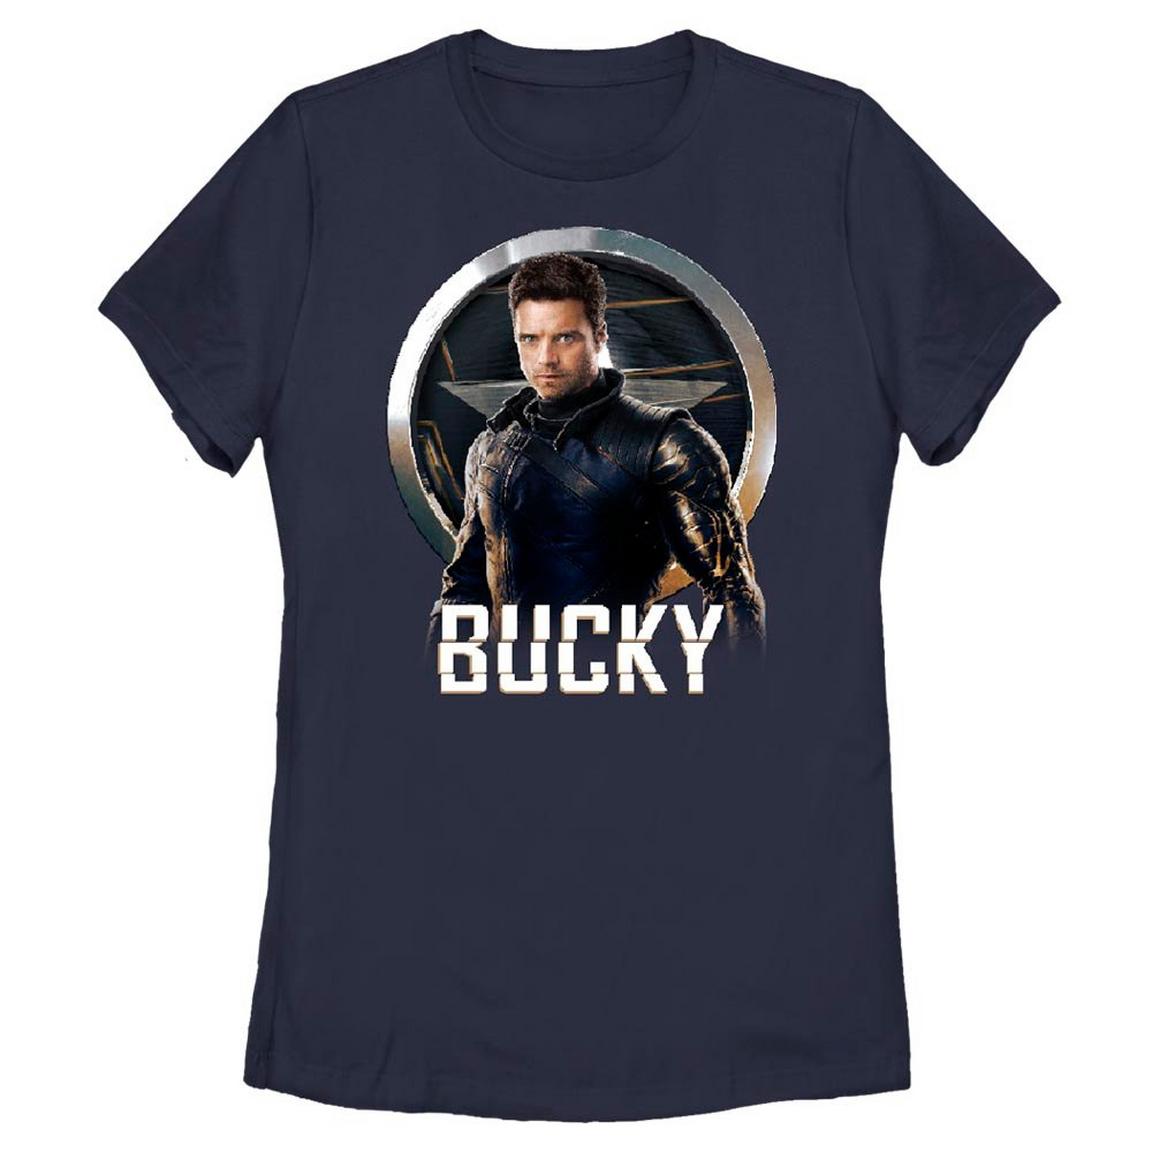 Marvel The Falcon and the Winter Solder Bucky Glitch Text Women's T-Shirt, Fifth Sun -  MLFW0044-70001004